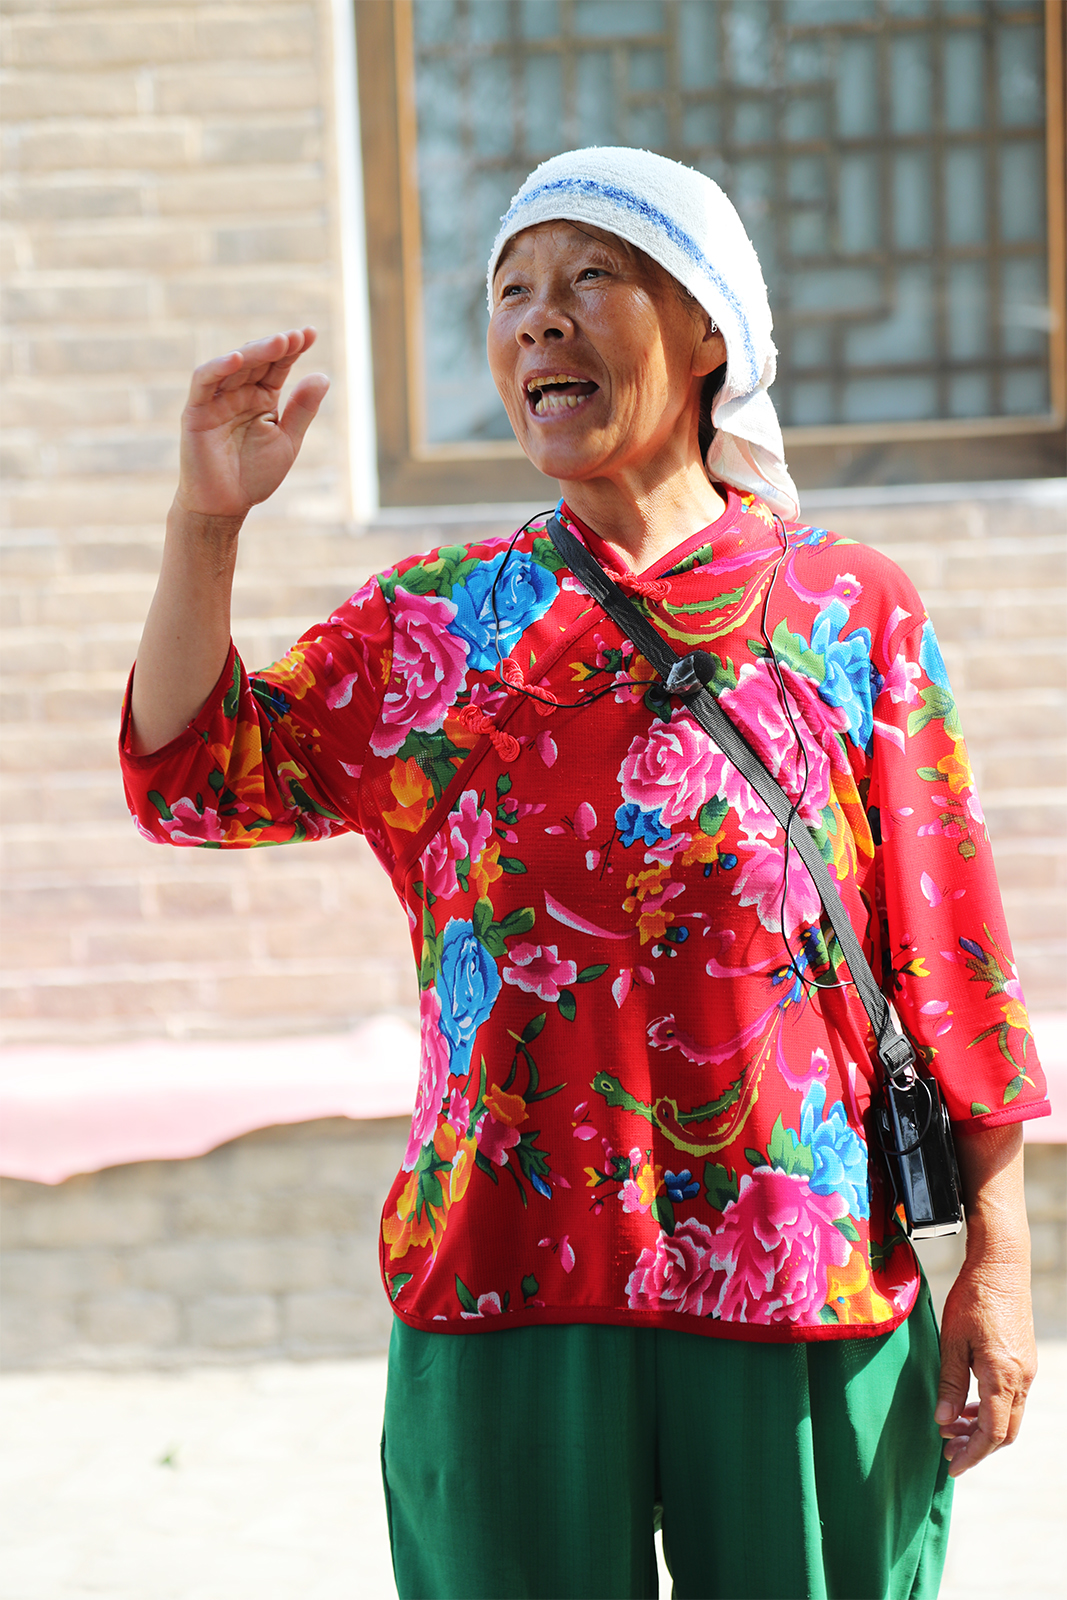 Chen Yuxiang, a resident of Lijiashan Village, welcomes visitors to her home. Chen has become an online sensation by sharing glimpses of local life on social media. /CGTN